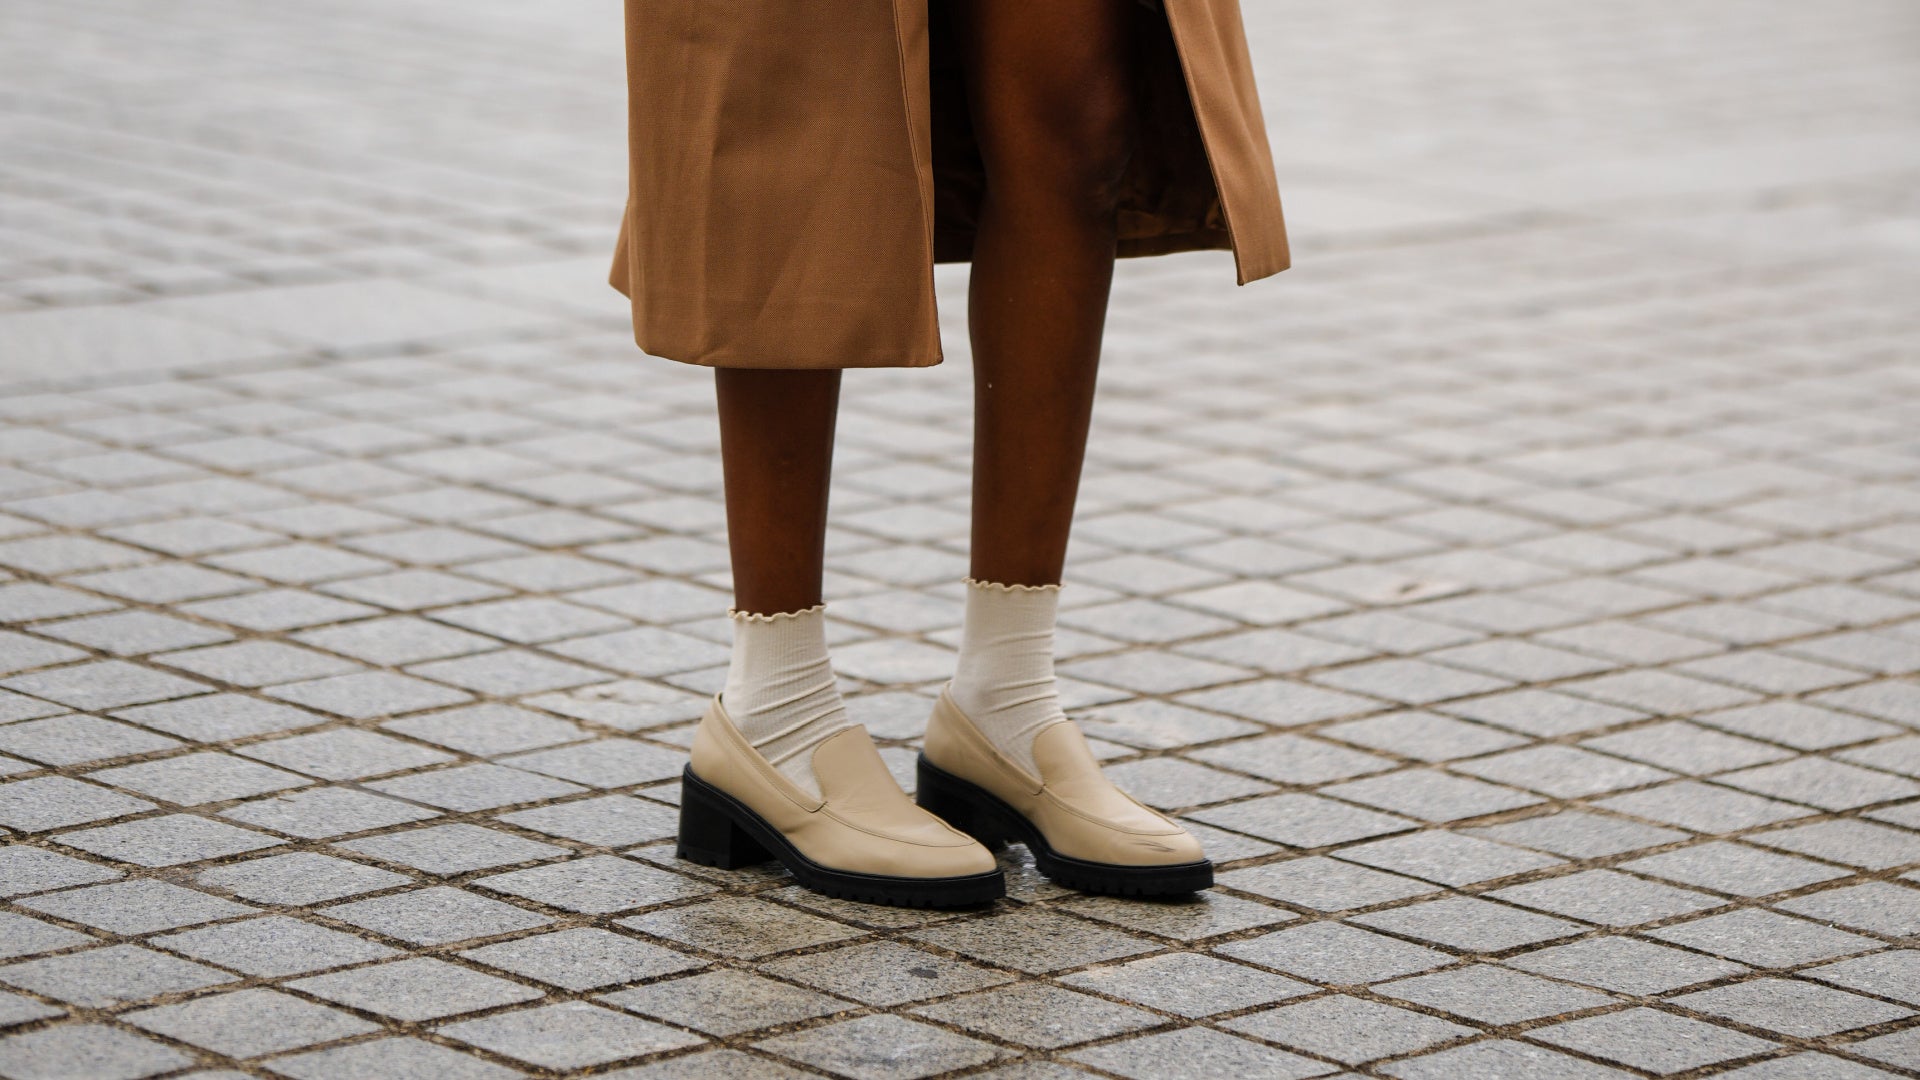 11 Loafers That Will Upgrade Your Fall Outfits